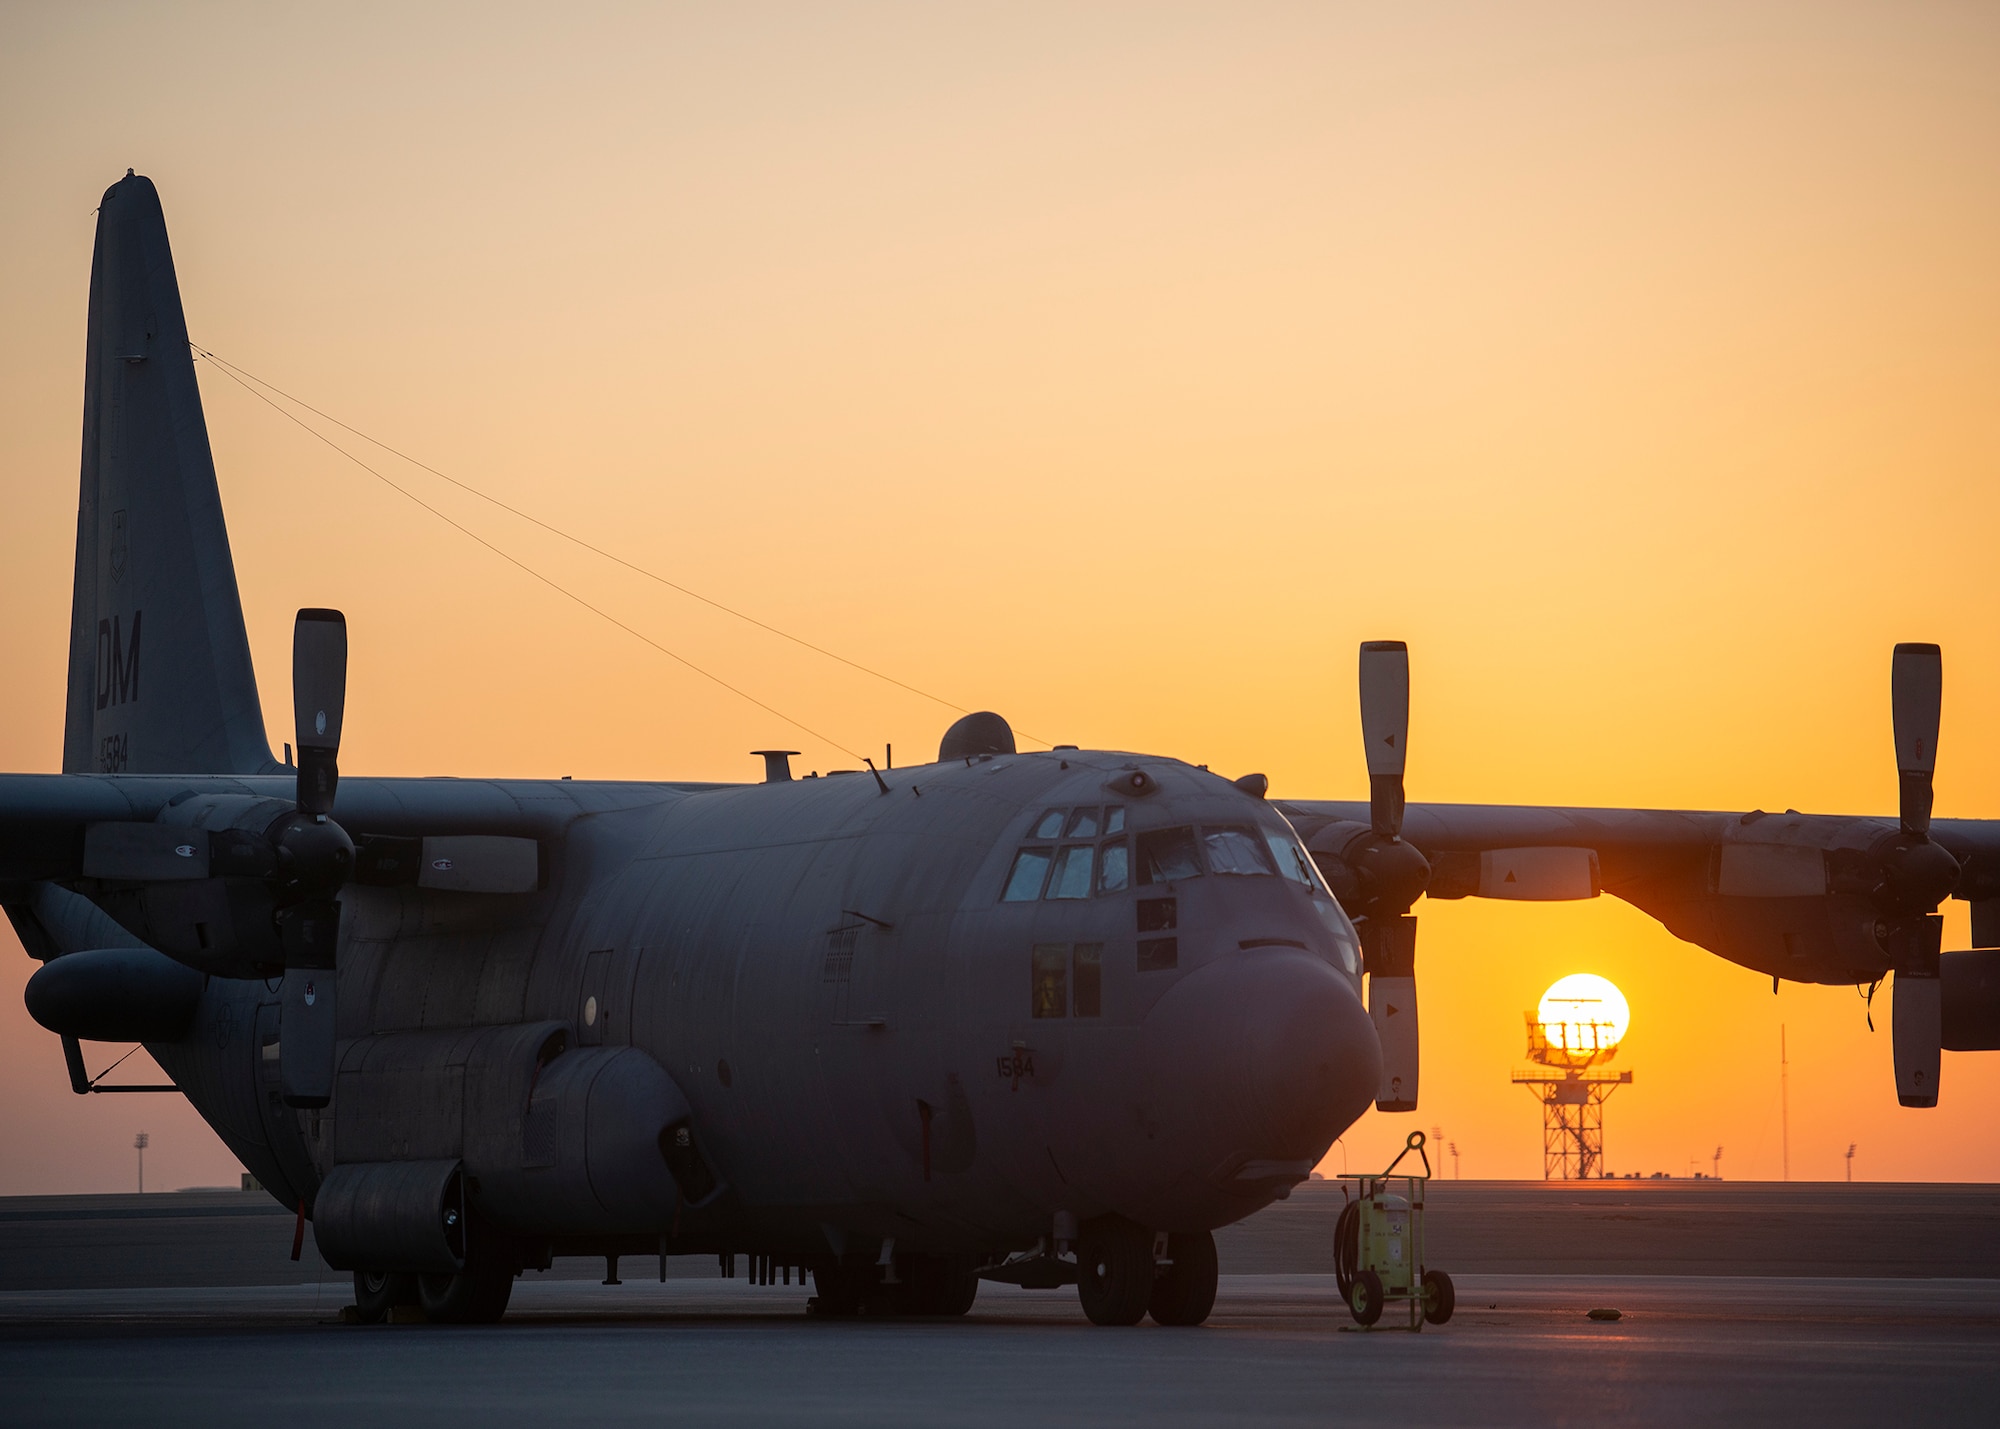 A U.S. Air Force EC-130H Compass Call assigned to 41st Expeditionary Electronic Combat Squadron sits parked on the ramp at Al Dhafra Air Base, United Arab Emirates, Dec. 2, 2020.